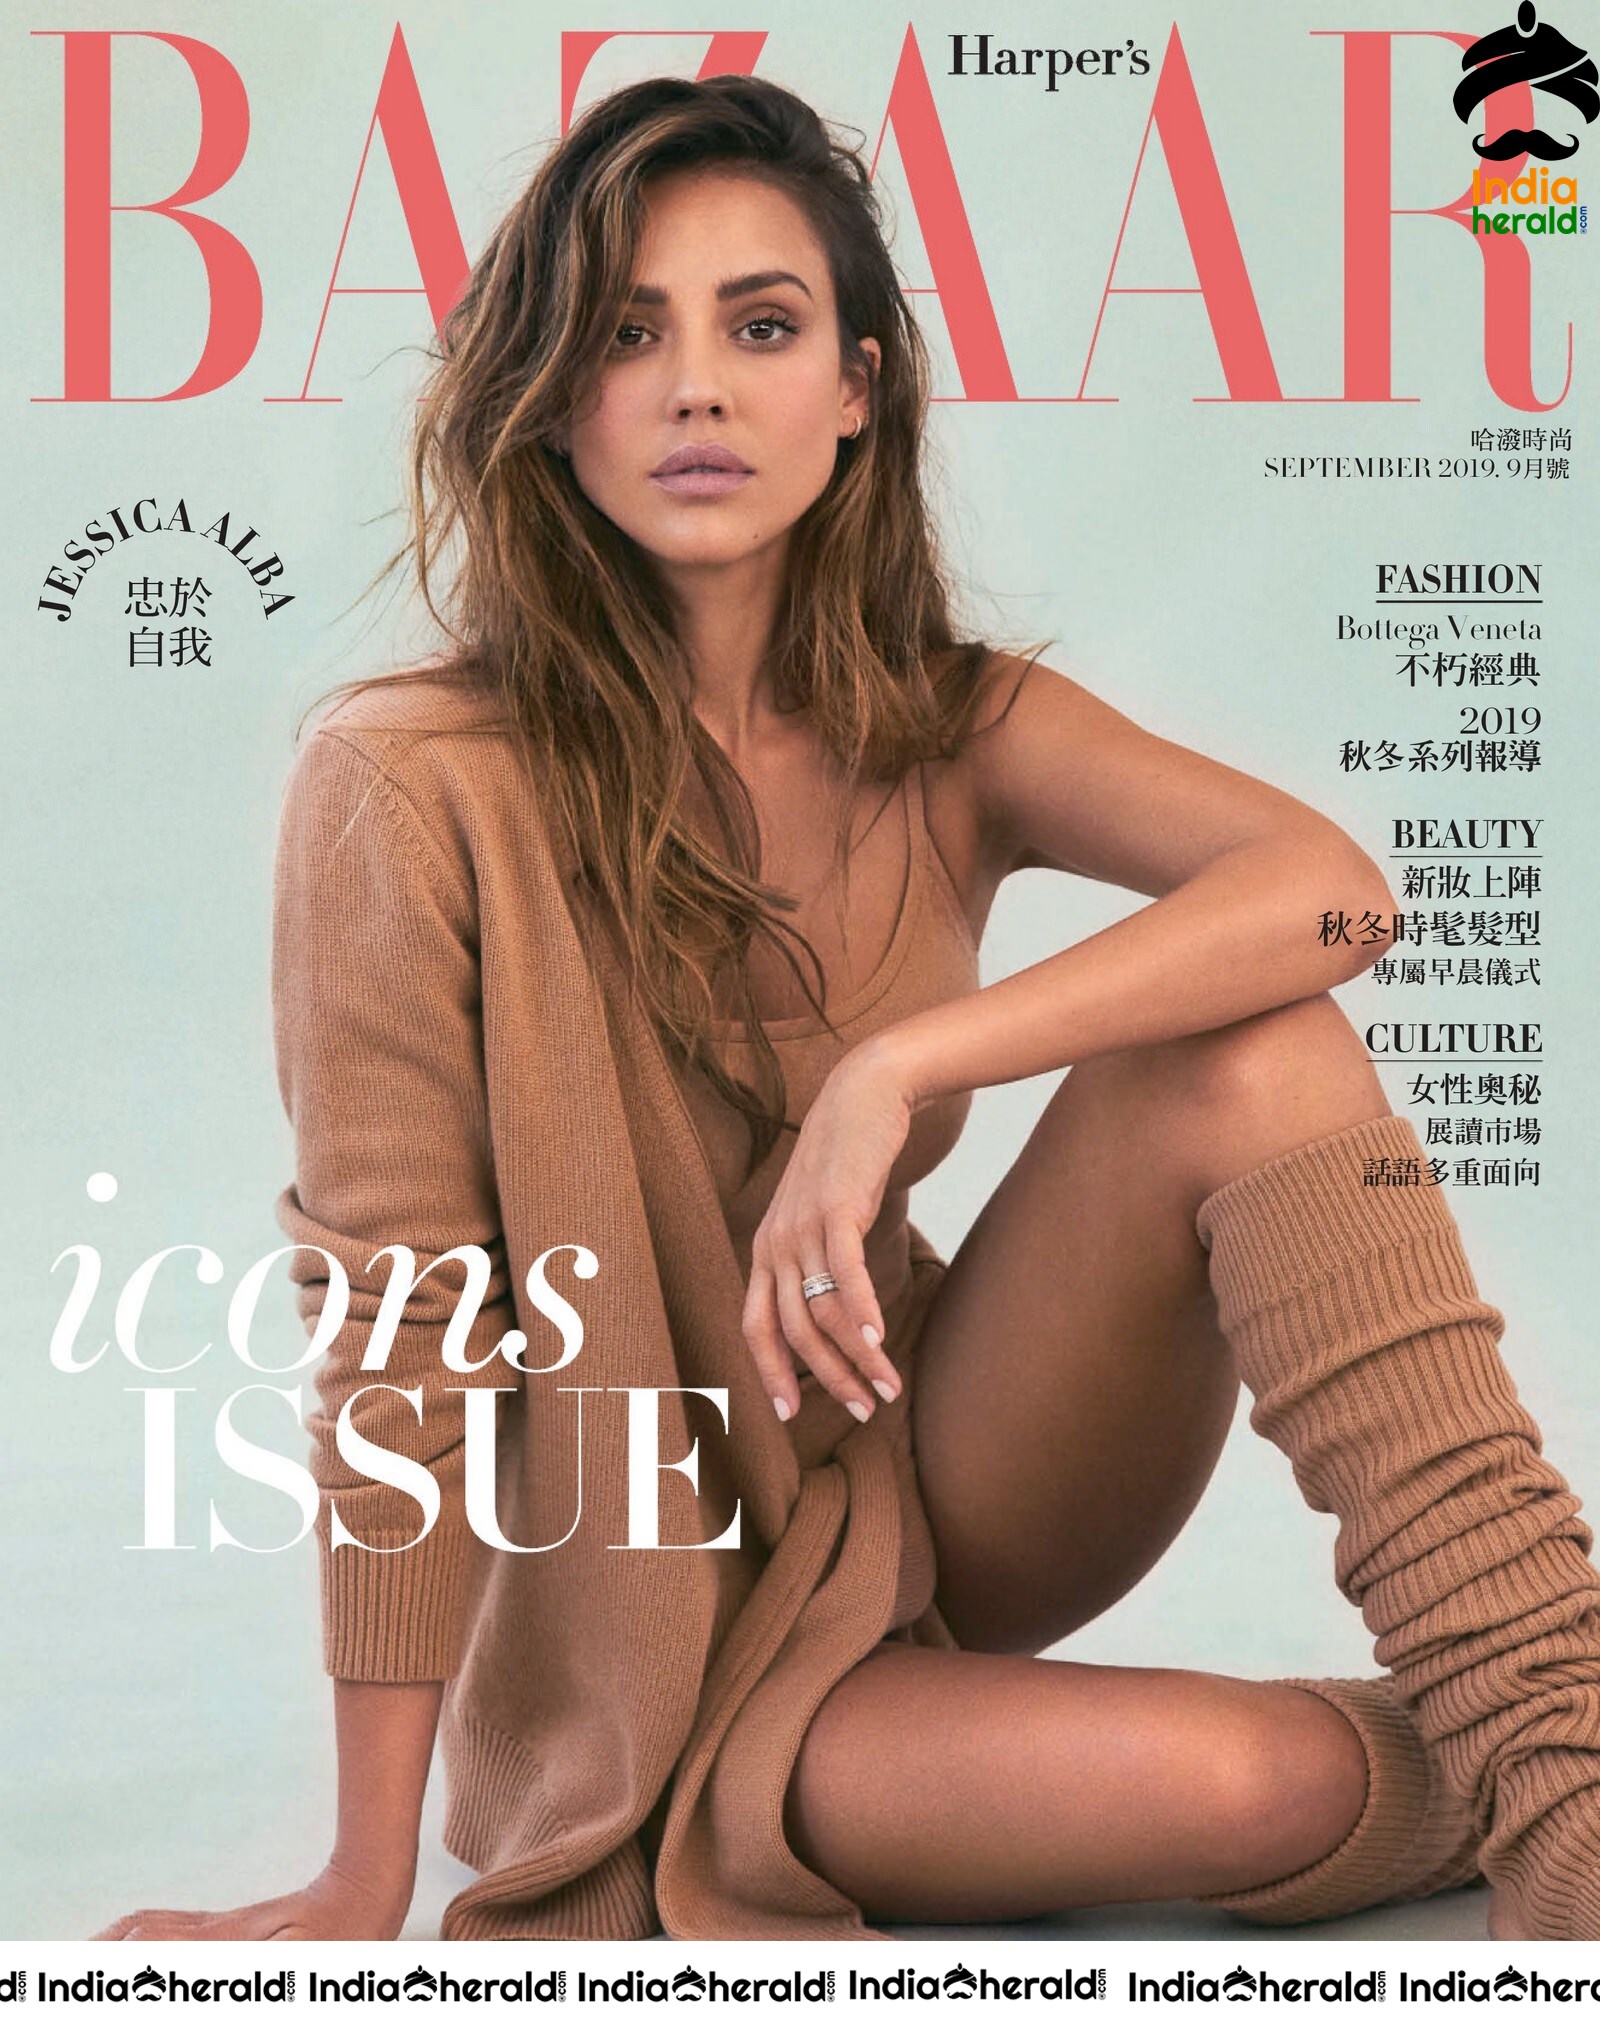 Jessica Alba poses Hot For Harpers Bazaar Magazine Taiwan Edition Sep 2019 Issue